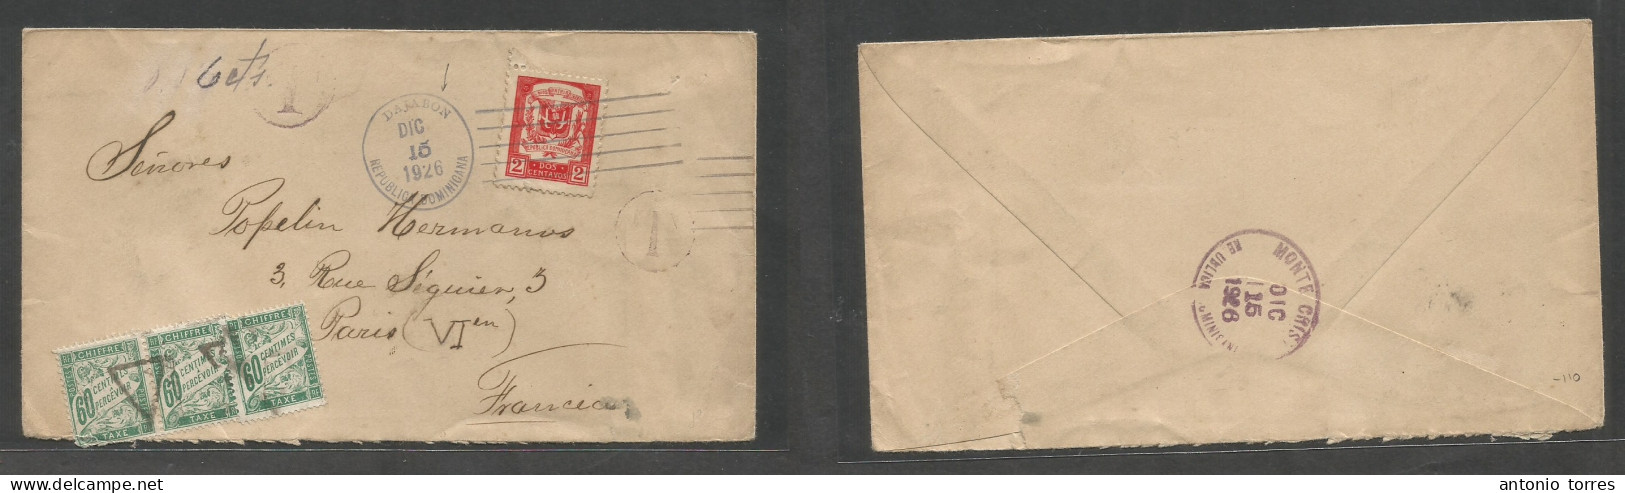 Dominican Rep. 1926 (15 Dic) Dajabon - France, Paris. 2c Red Single Fkd Env, Taxed + Three French P. Dues, Cancelled At - Dominican Republic